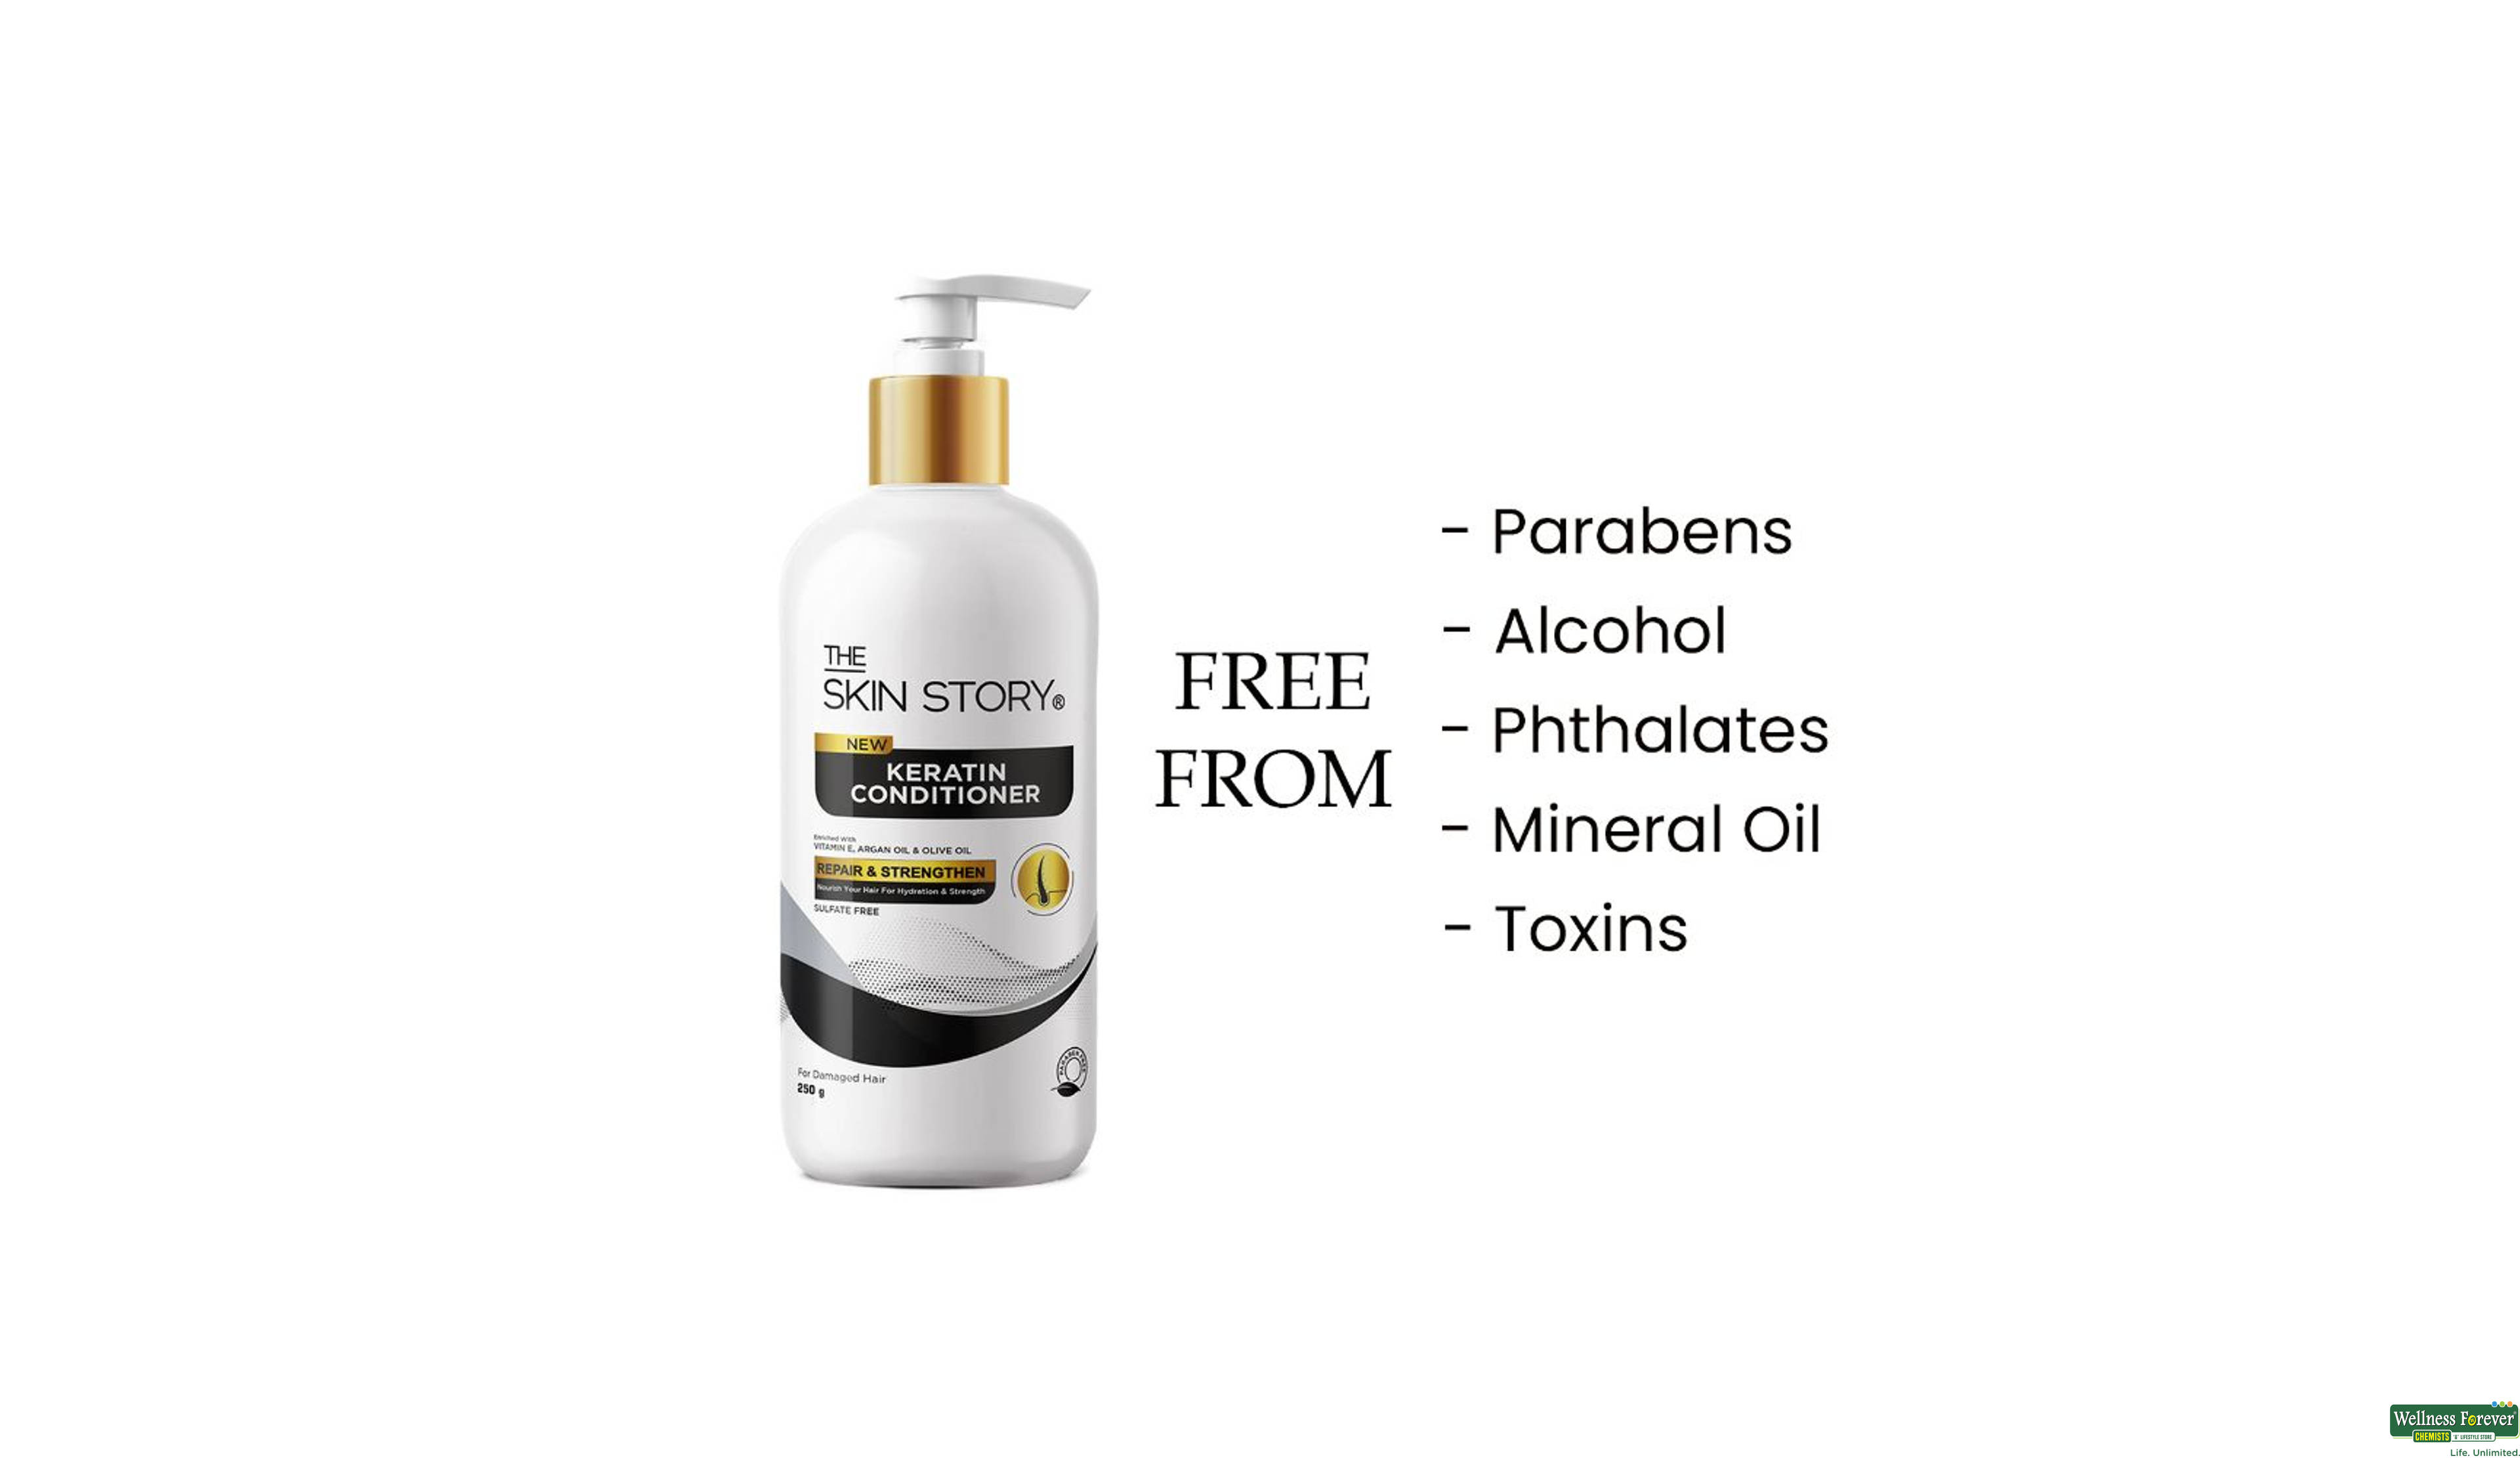 THE SKIN STORY KERATIN CONDITIONER FOR DAMAGMED HAIR 250GM- 8, 250ML, 